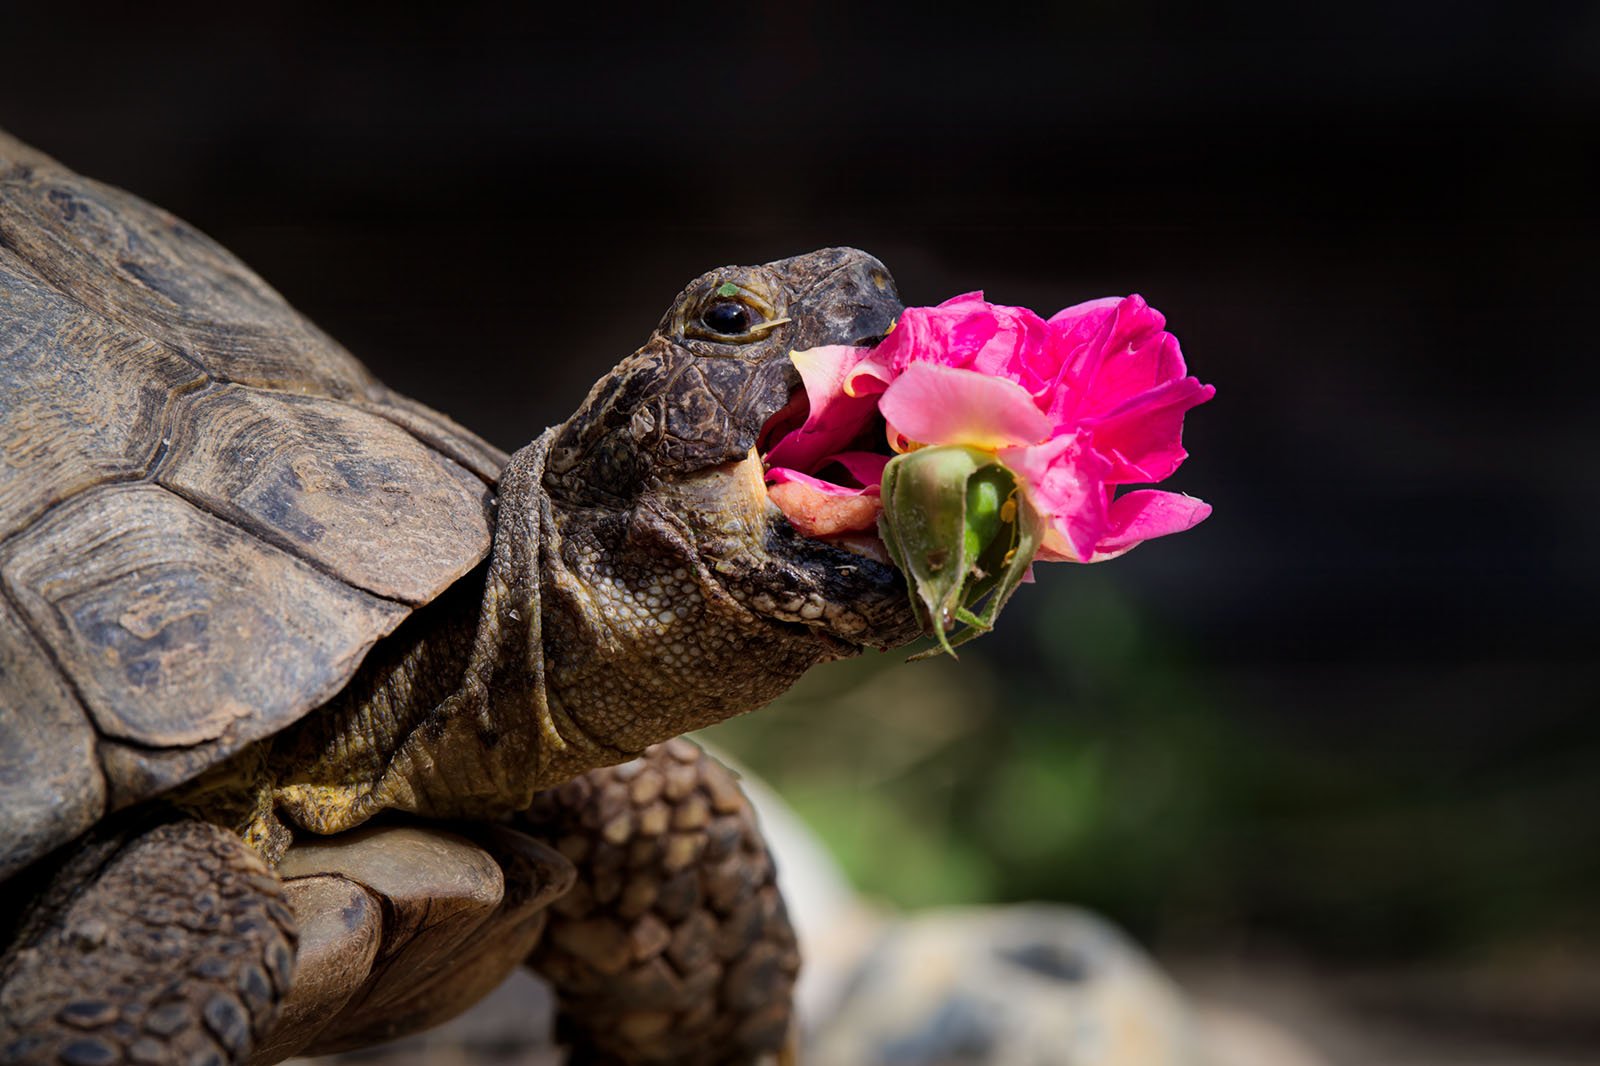 A tortoise with a textured, brown shell is biting a vibrant pink rose. The close-up shot captures the tortoise's head and front legs, with the rose partially inside its mouth. The background is blurred, highlighting the tortoise and the flower.